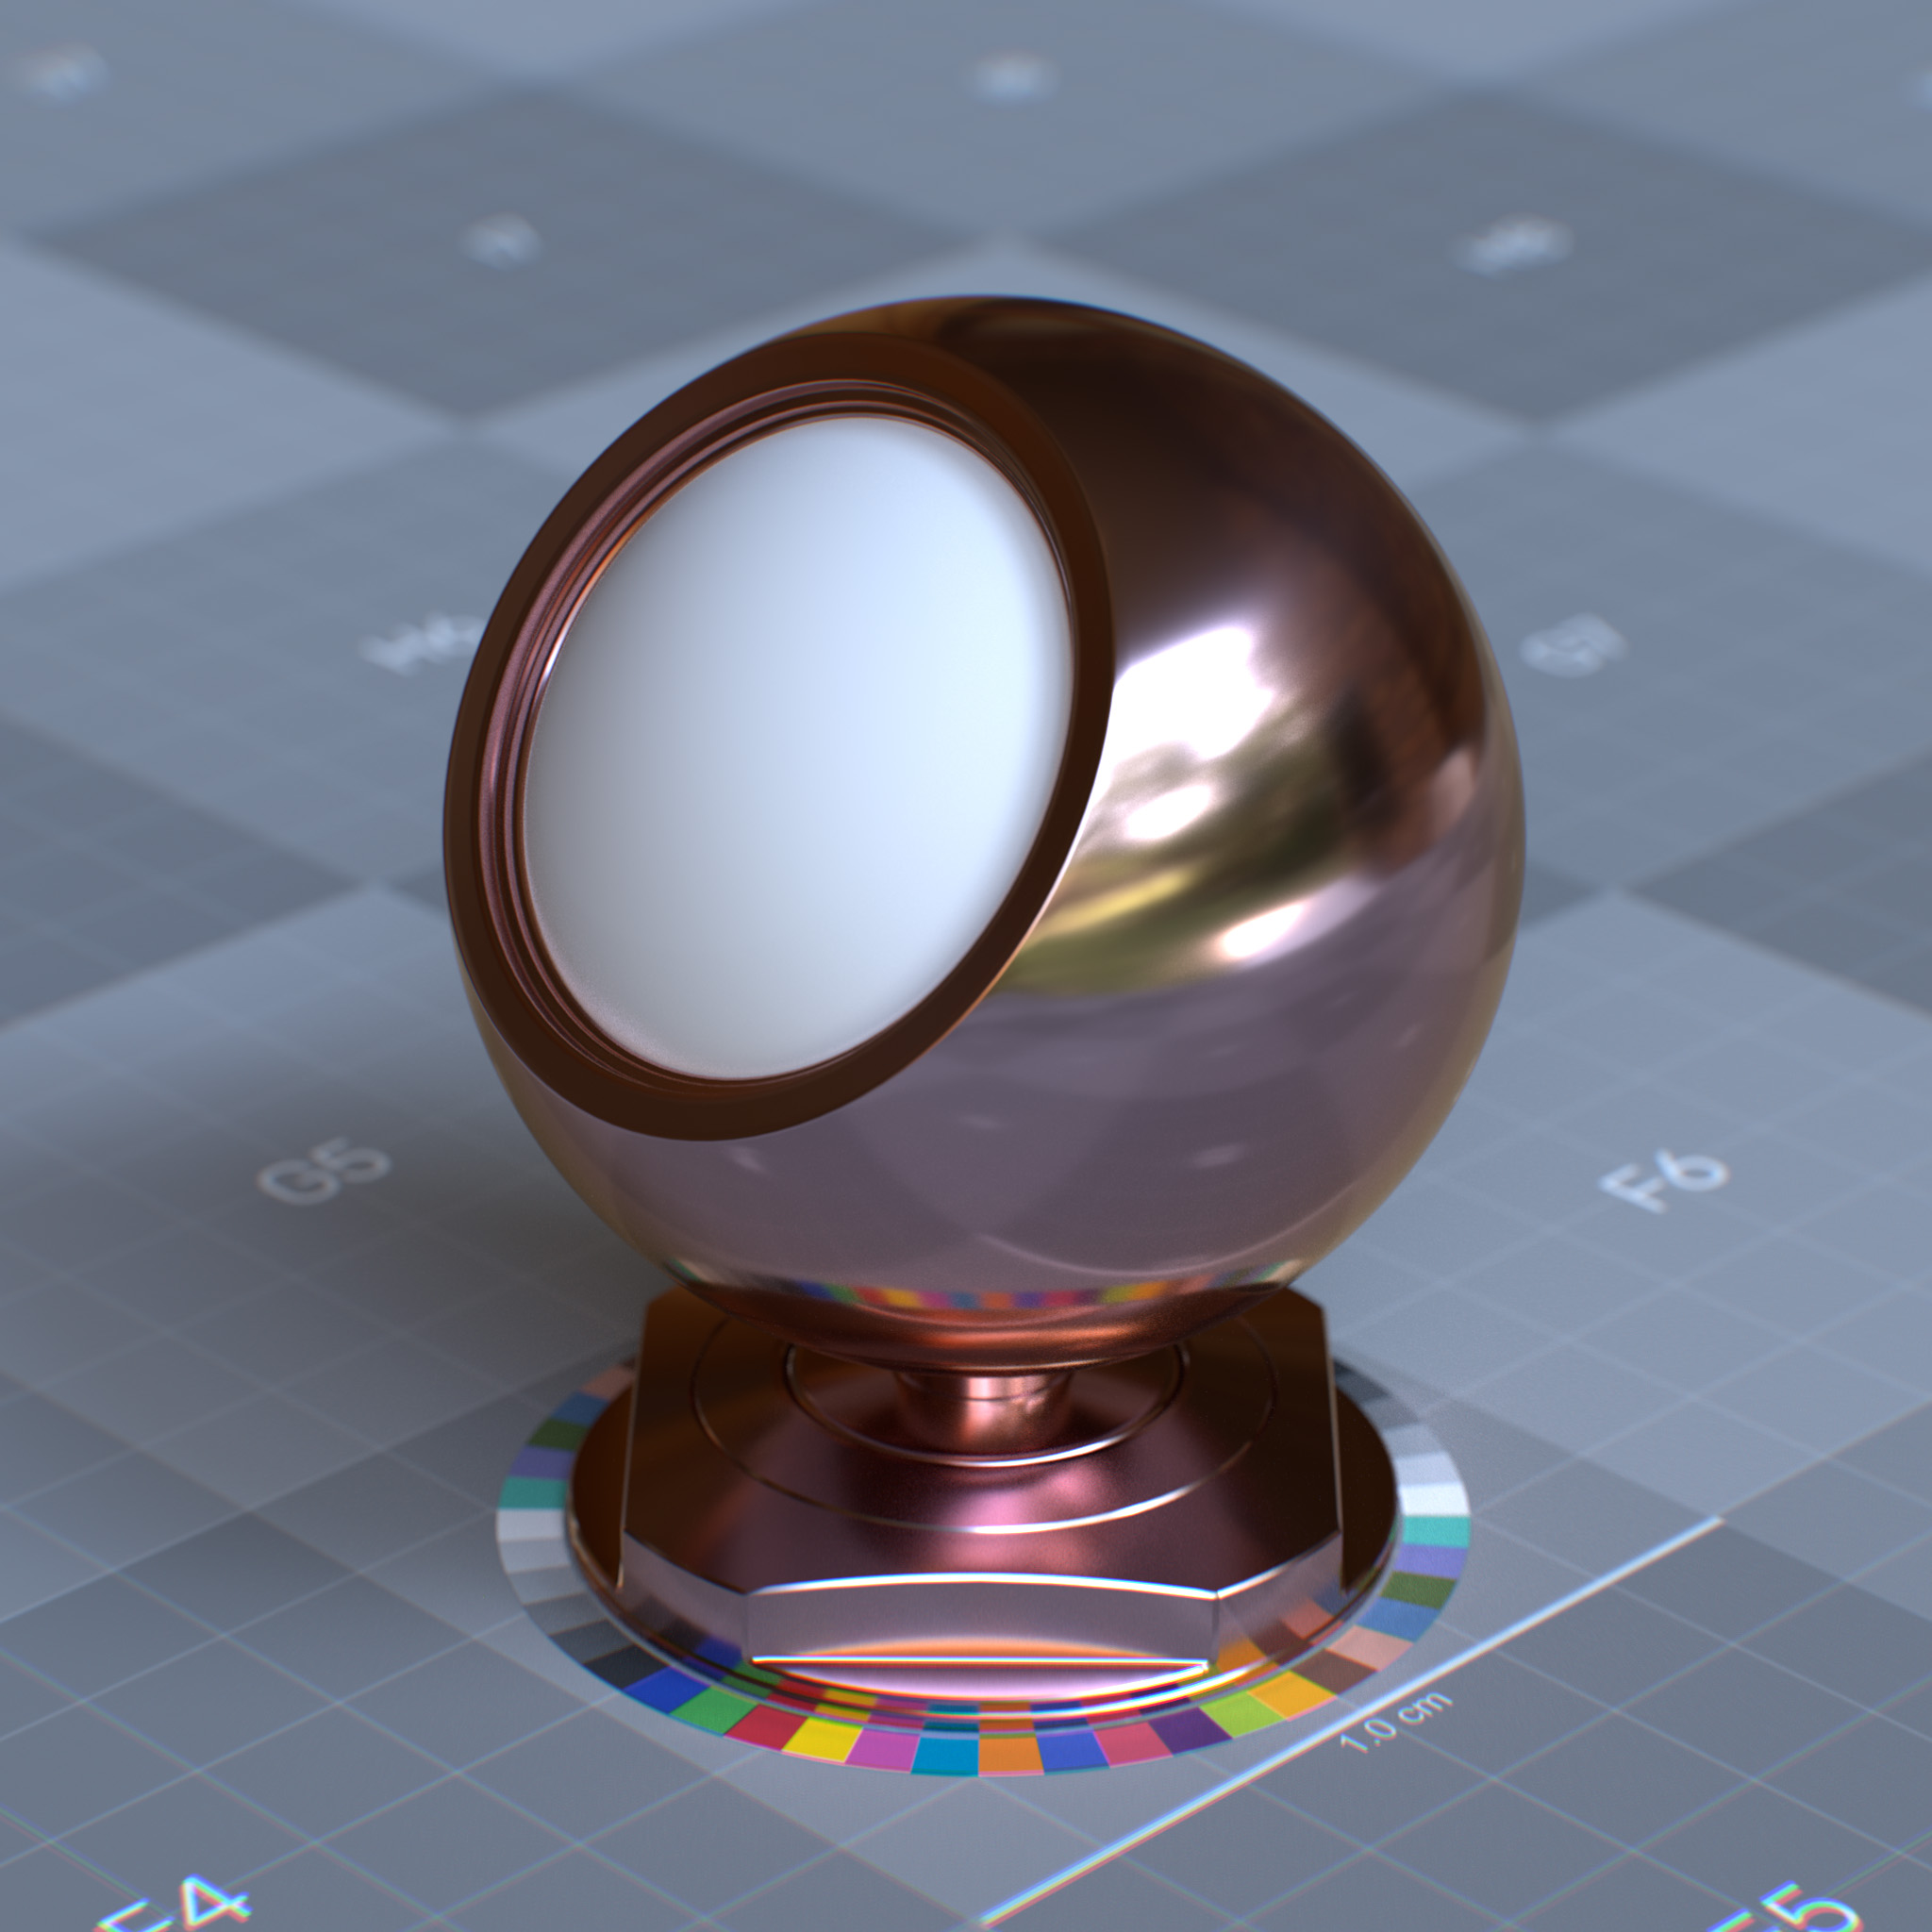 rtx_material_omnisurfacebase_specular_reflection_anisotropy_0p5